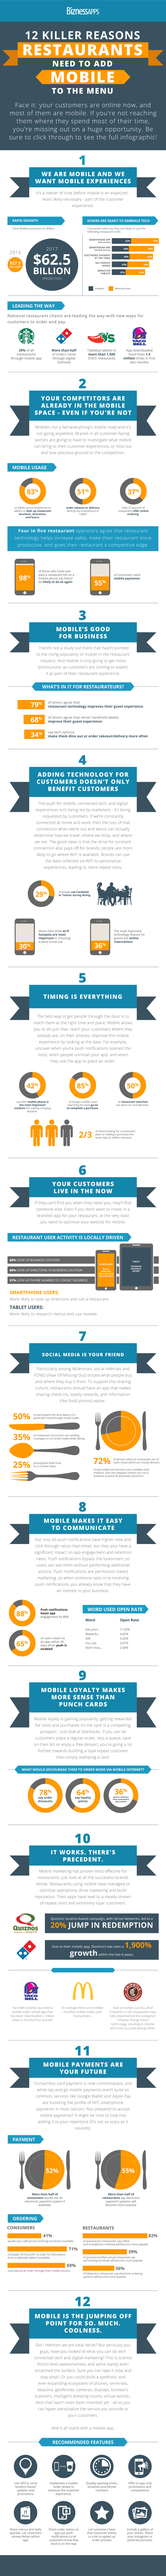 12 killer reasons why restaurants need to add mobile to the menu